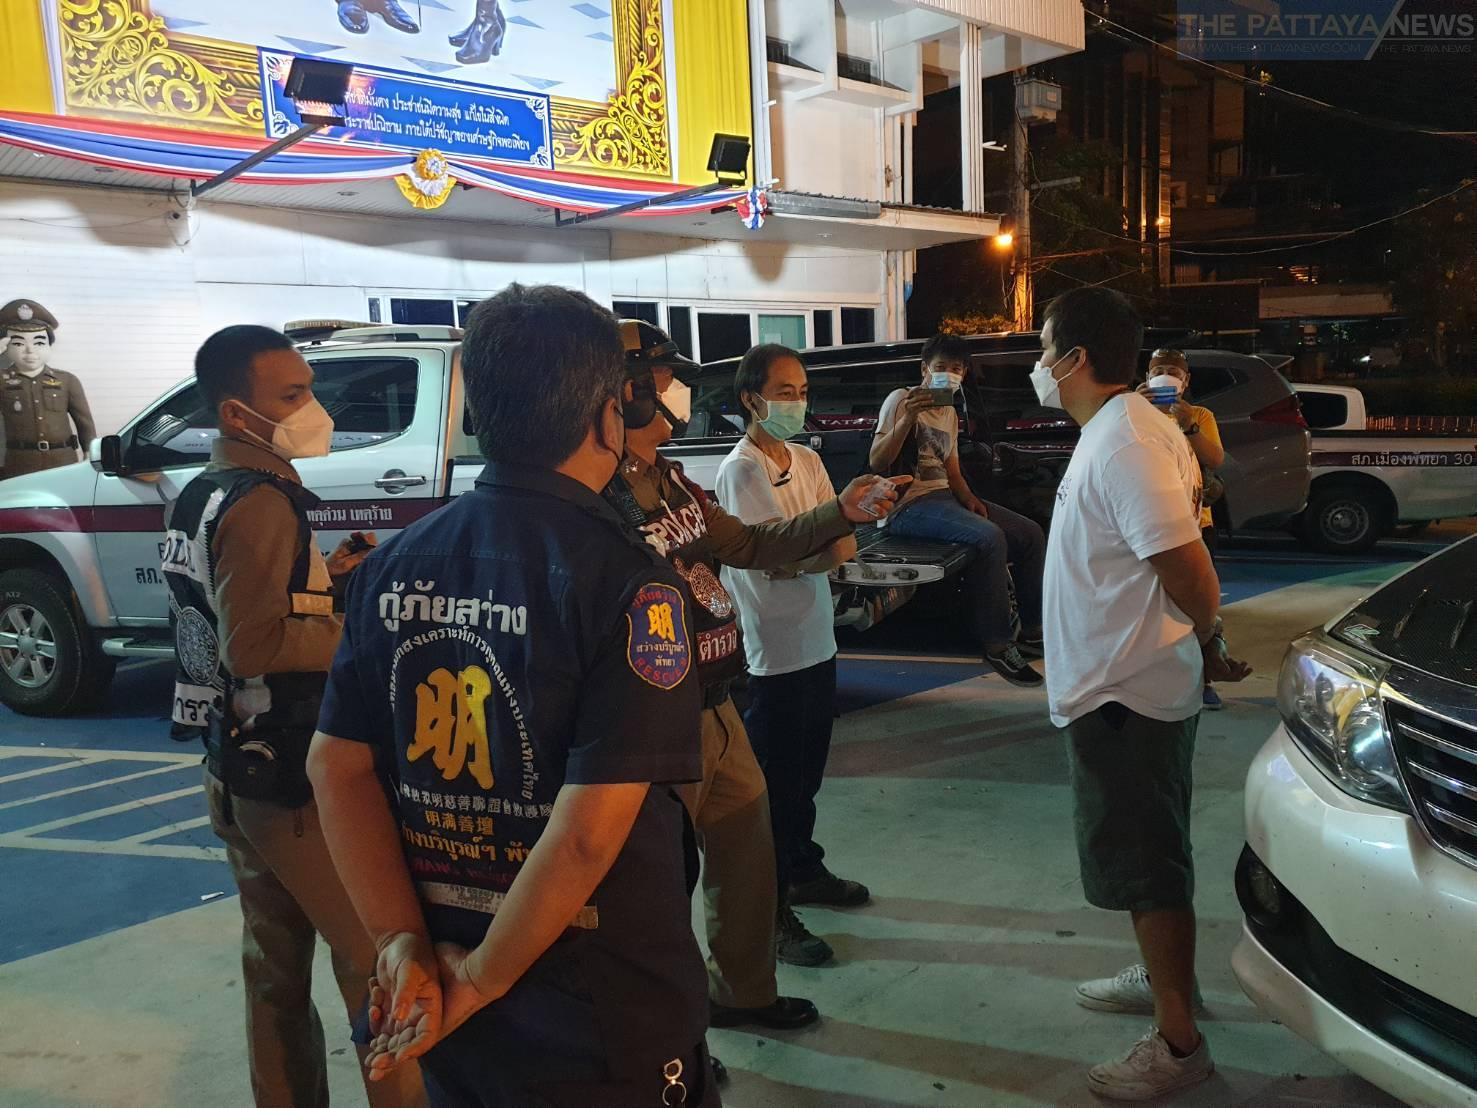 Video: Two young men fined in Pattaya for allegedly illegally having emergency sirens while driving